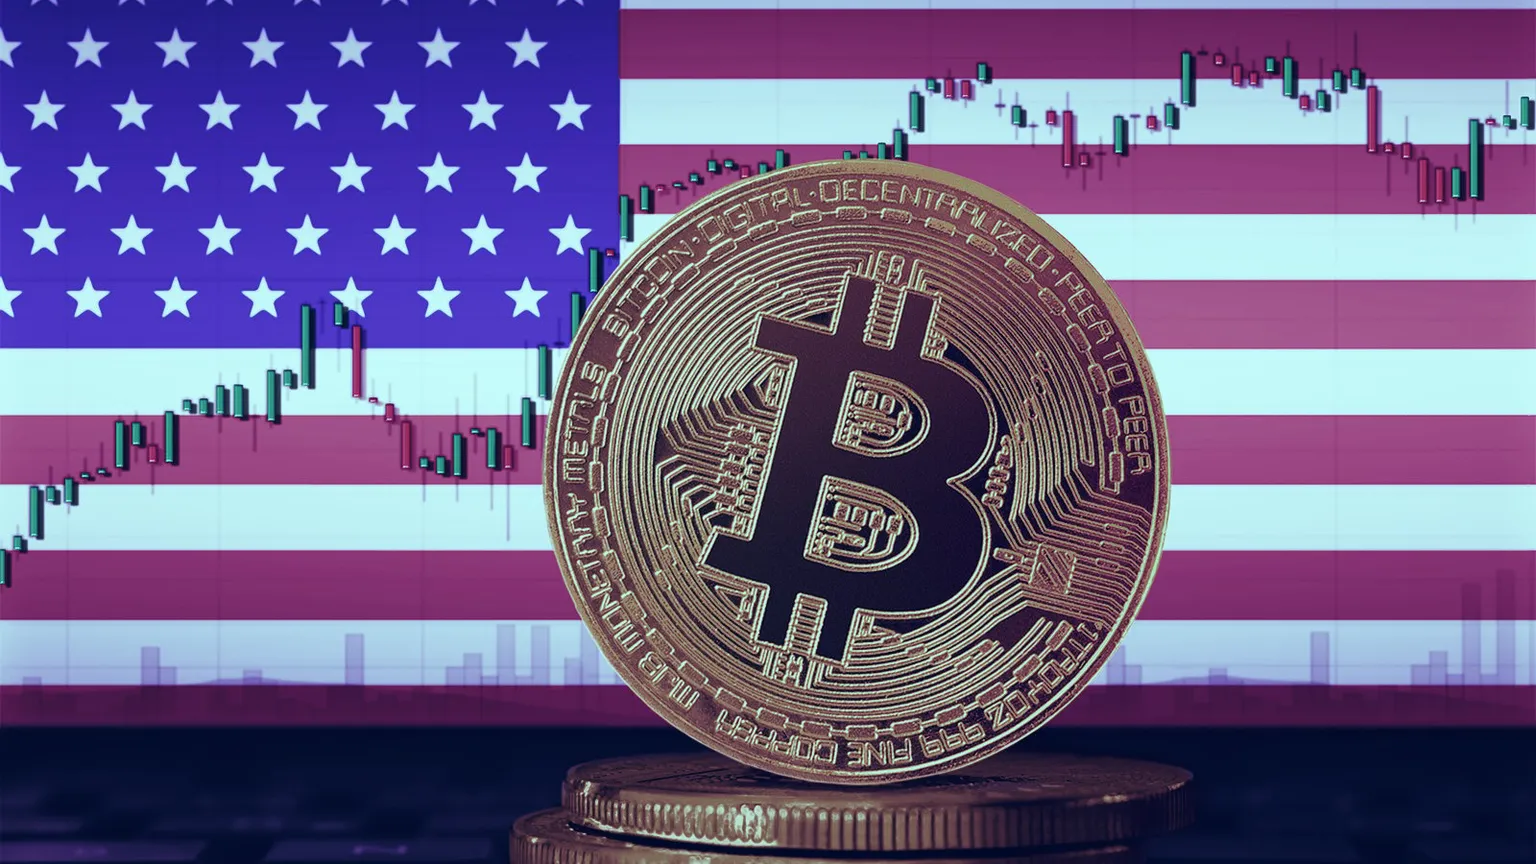 Bitcoin and the USA. Image: Shutterstock